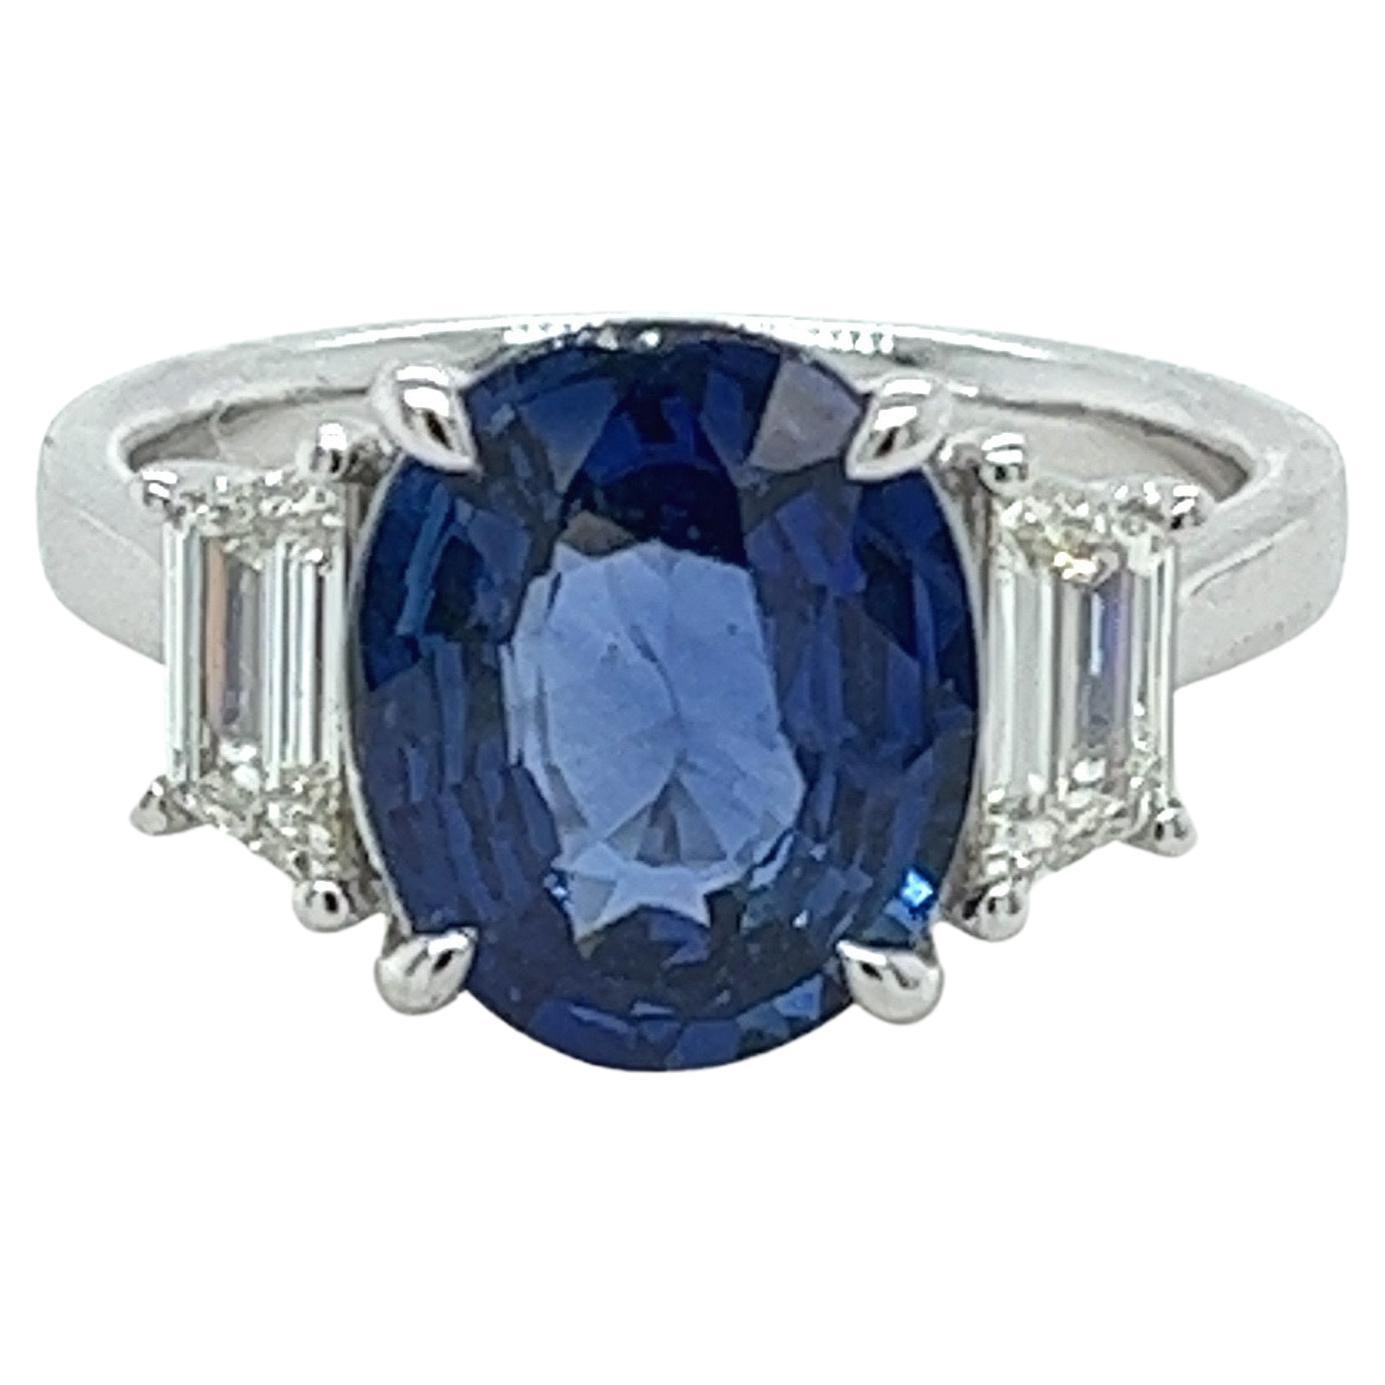 GIA Certified 3.73 Carat Oval Ceylon Sapphire & Diamond Ring in Platinum For Sale